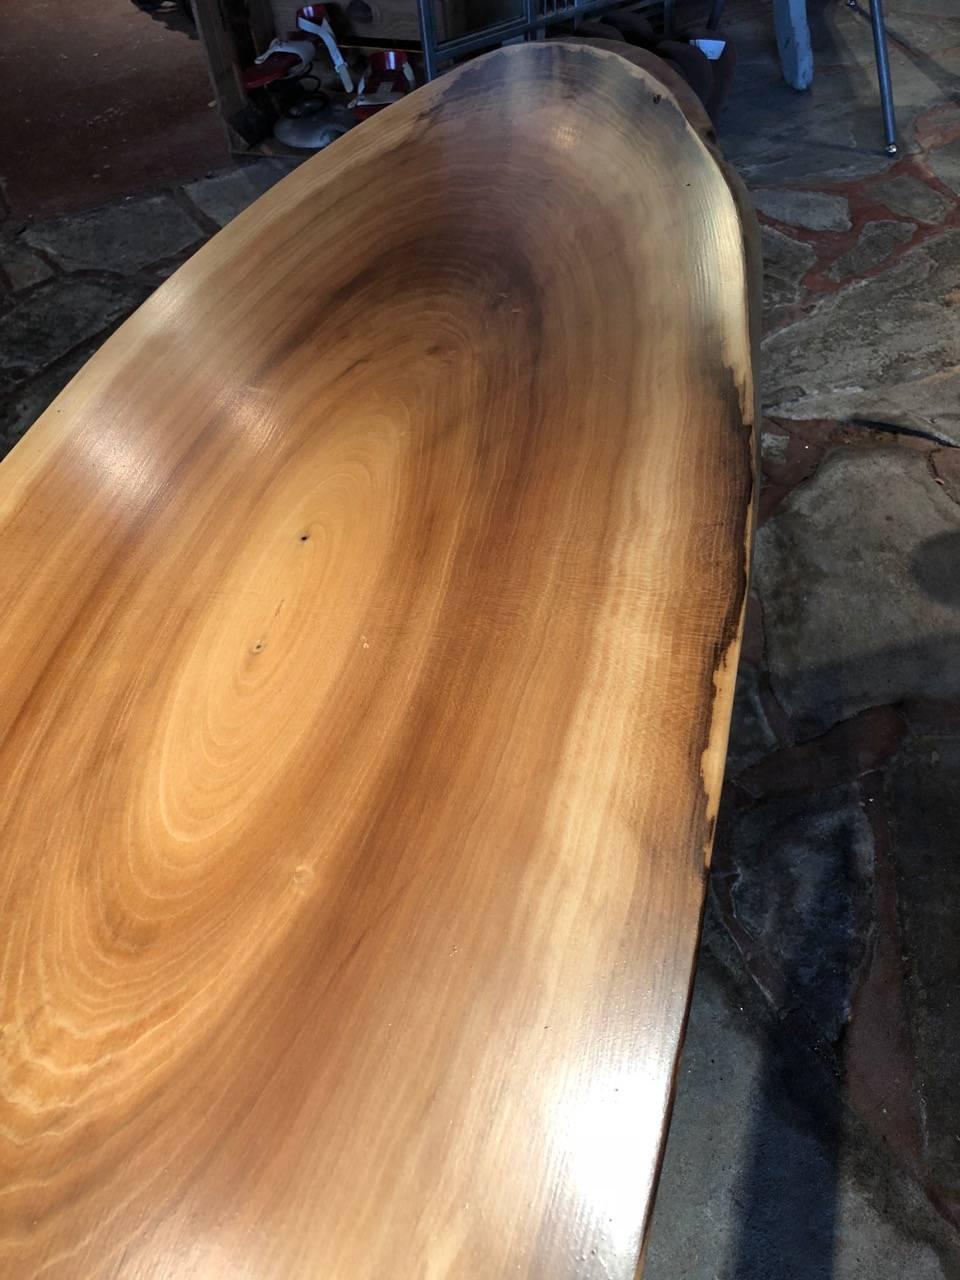 Very cool handmade slab of gorgeous poplar in the shape of a surfboard, fashioned into a modern coffee table with iron industrial machine legs.